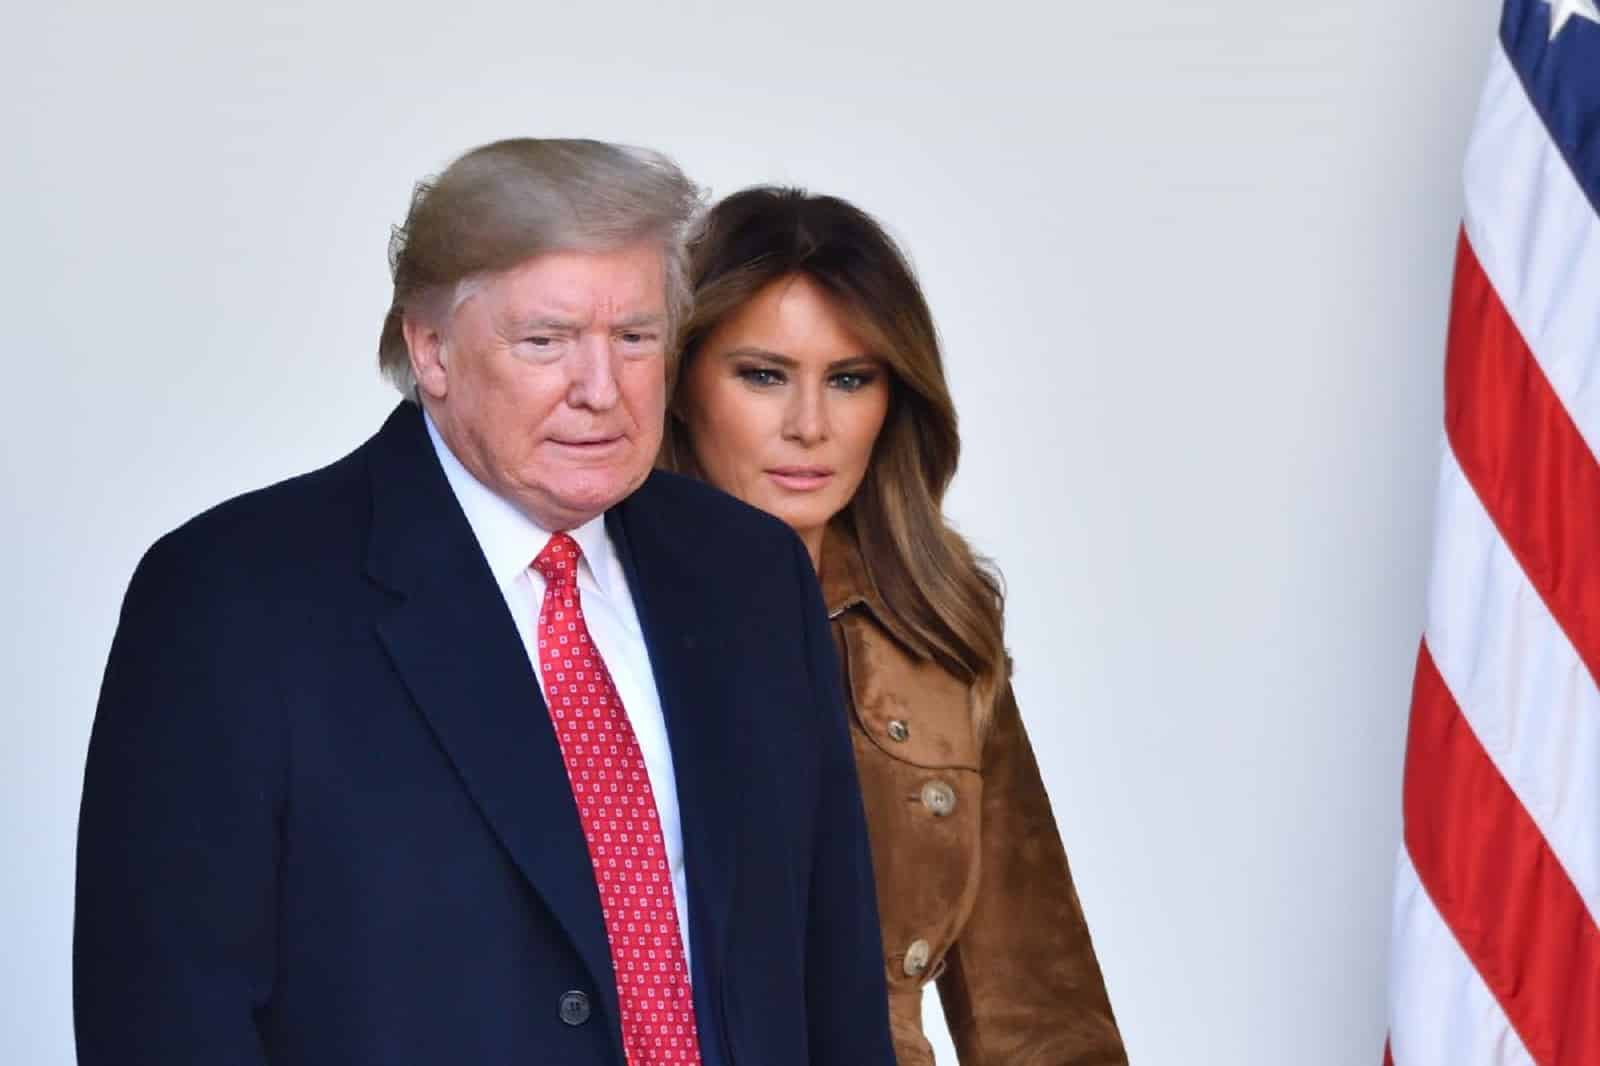 Where Is Melania? Reportedly Revisiting Prenup Amid Donald Trump's ...